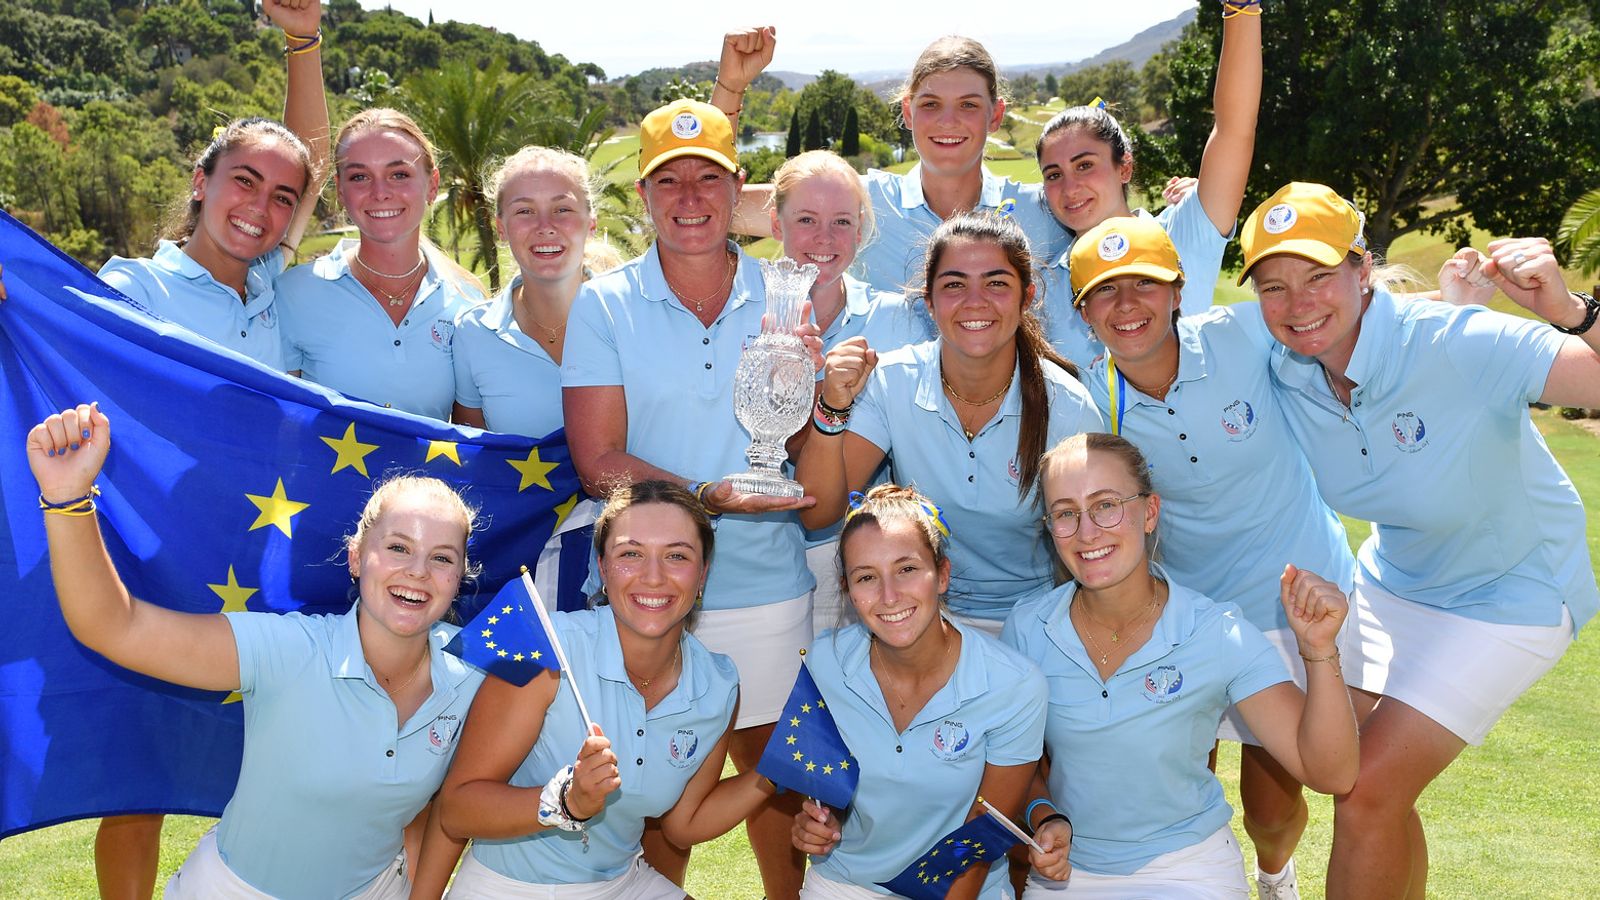 Junior Solheim Cup: Team Europe beat Team USA 15-9 in Spain to defend title for the first time